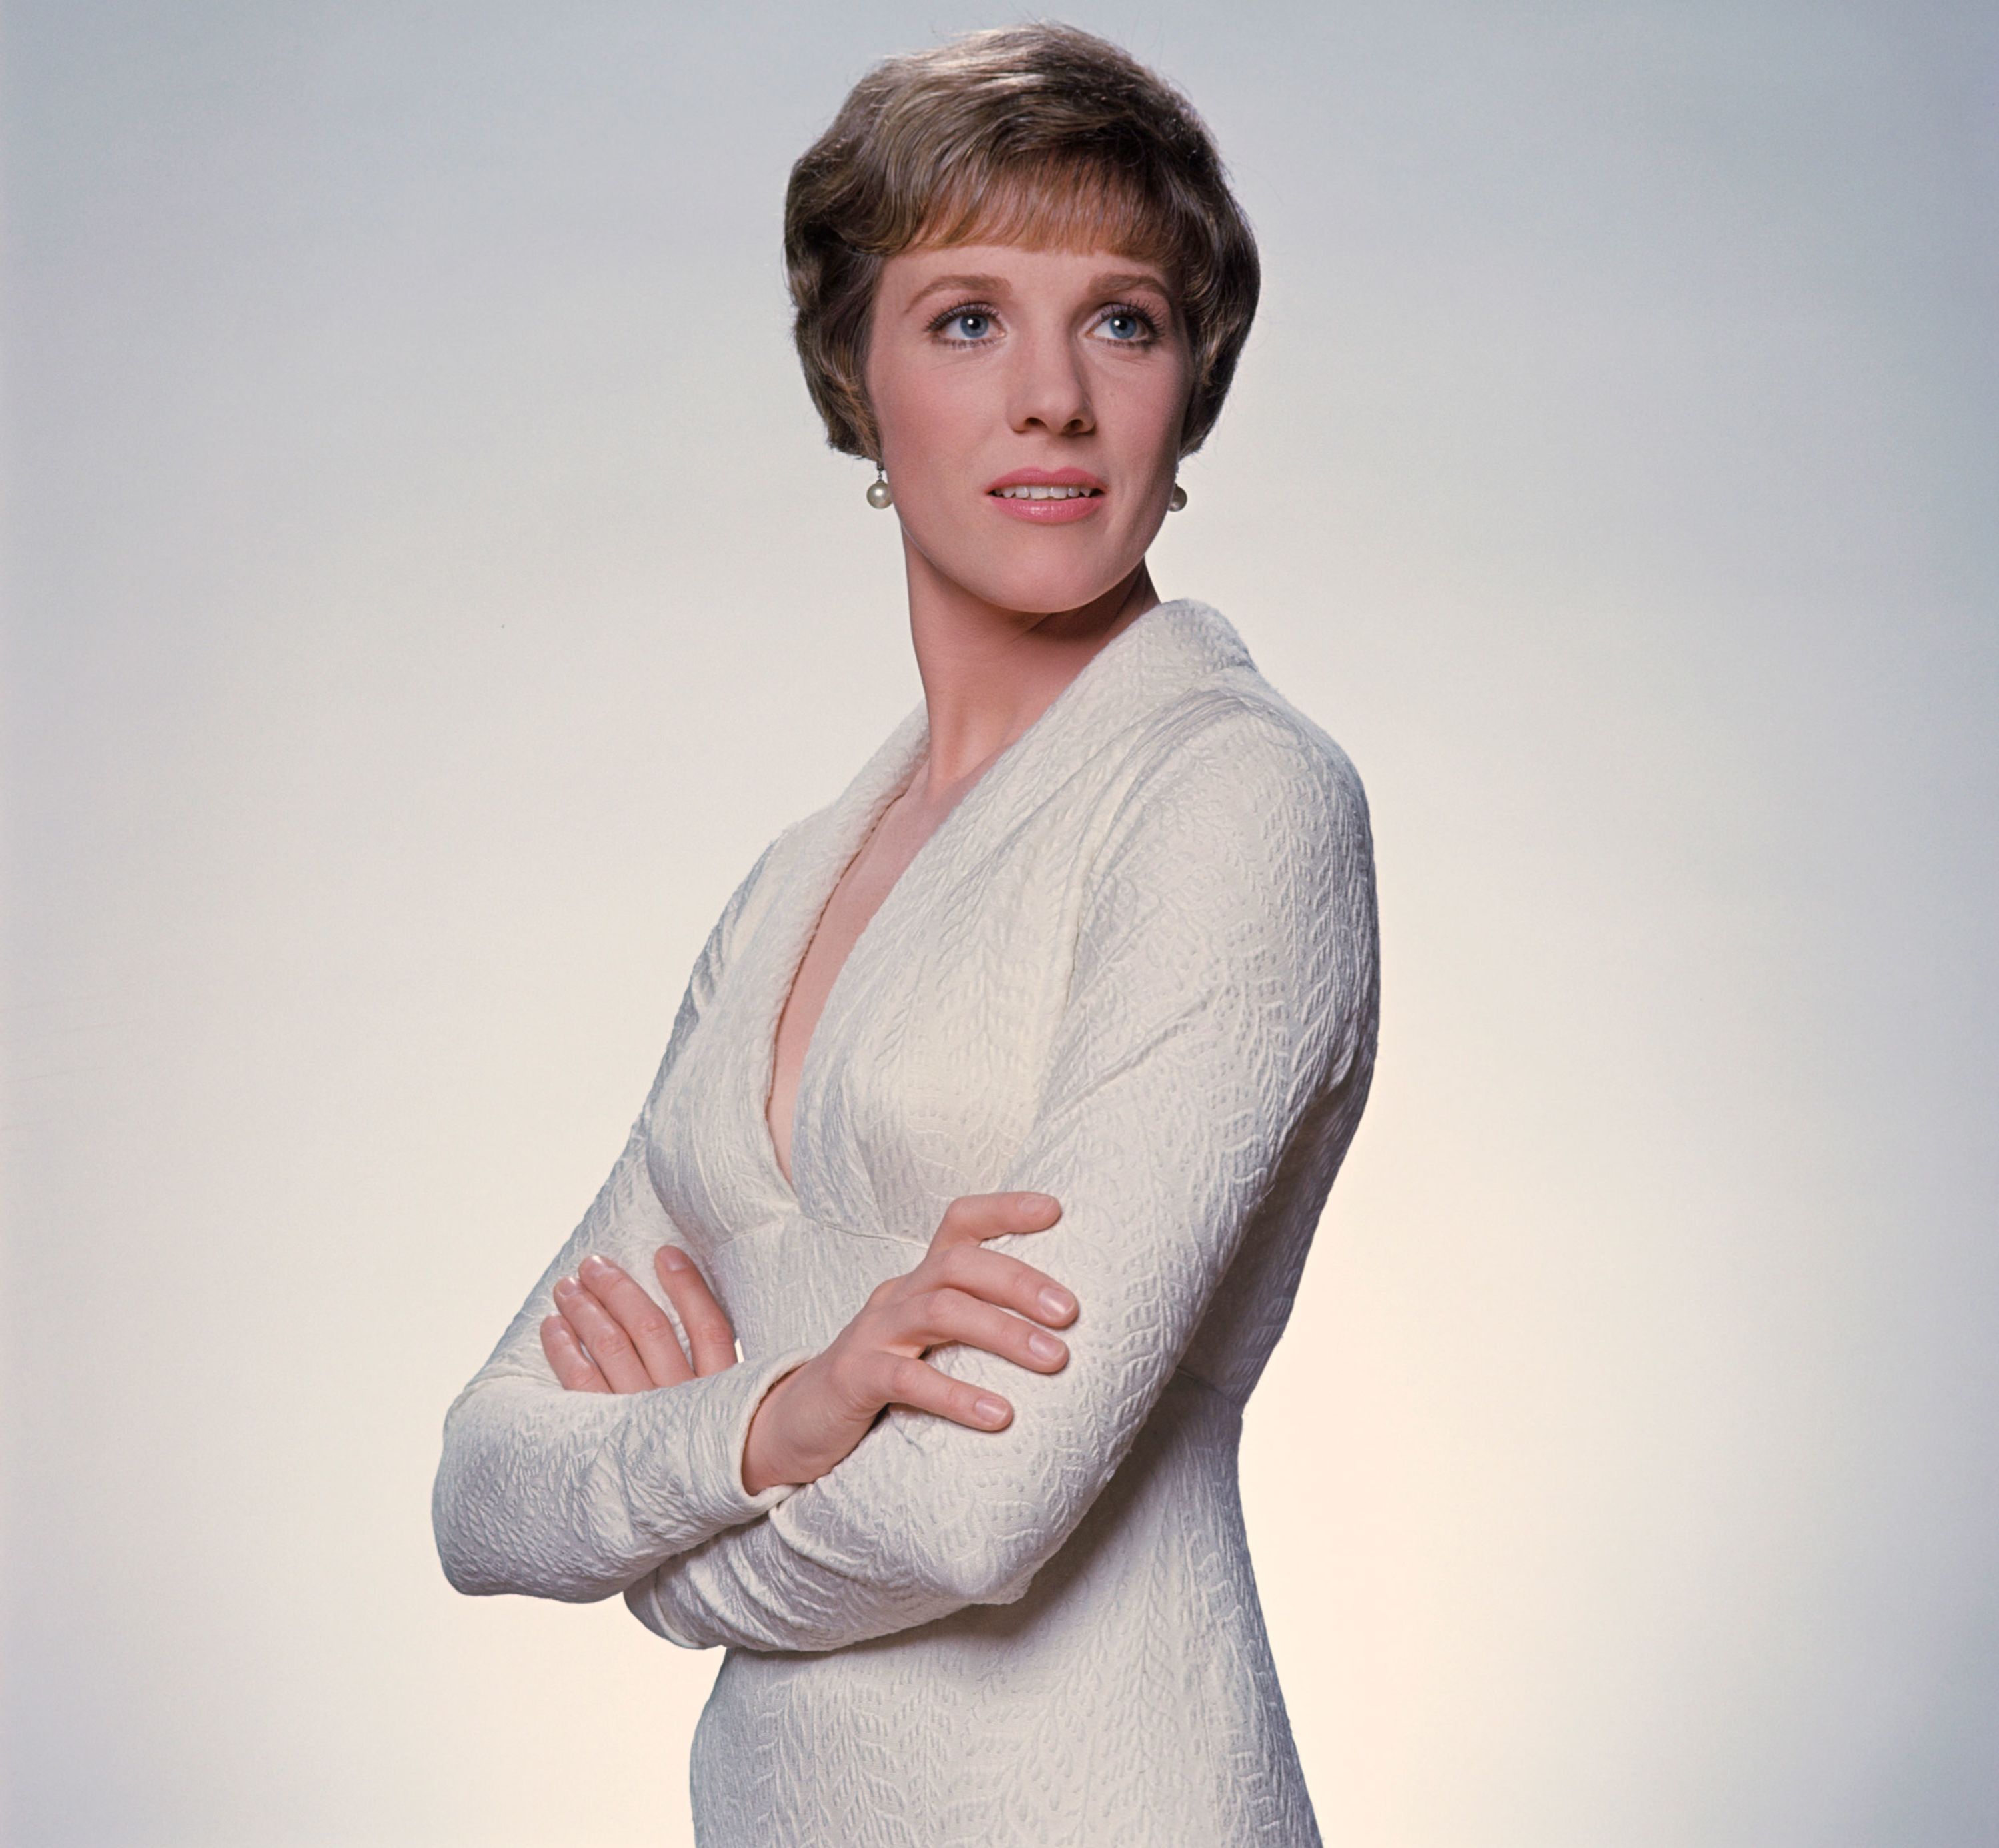 alvena cain campbell recommends Julie Andrews Sexy